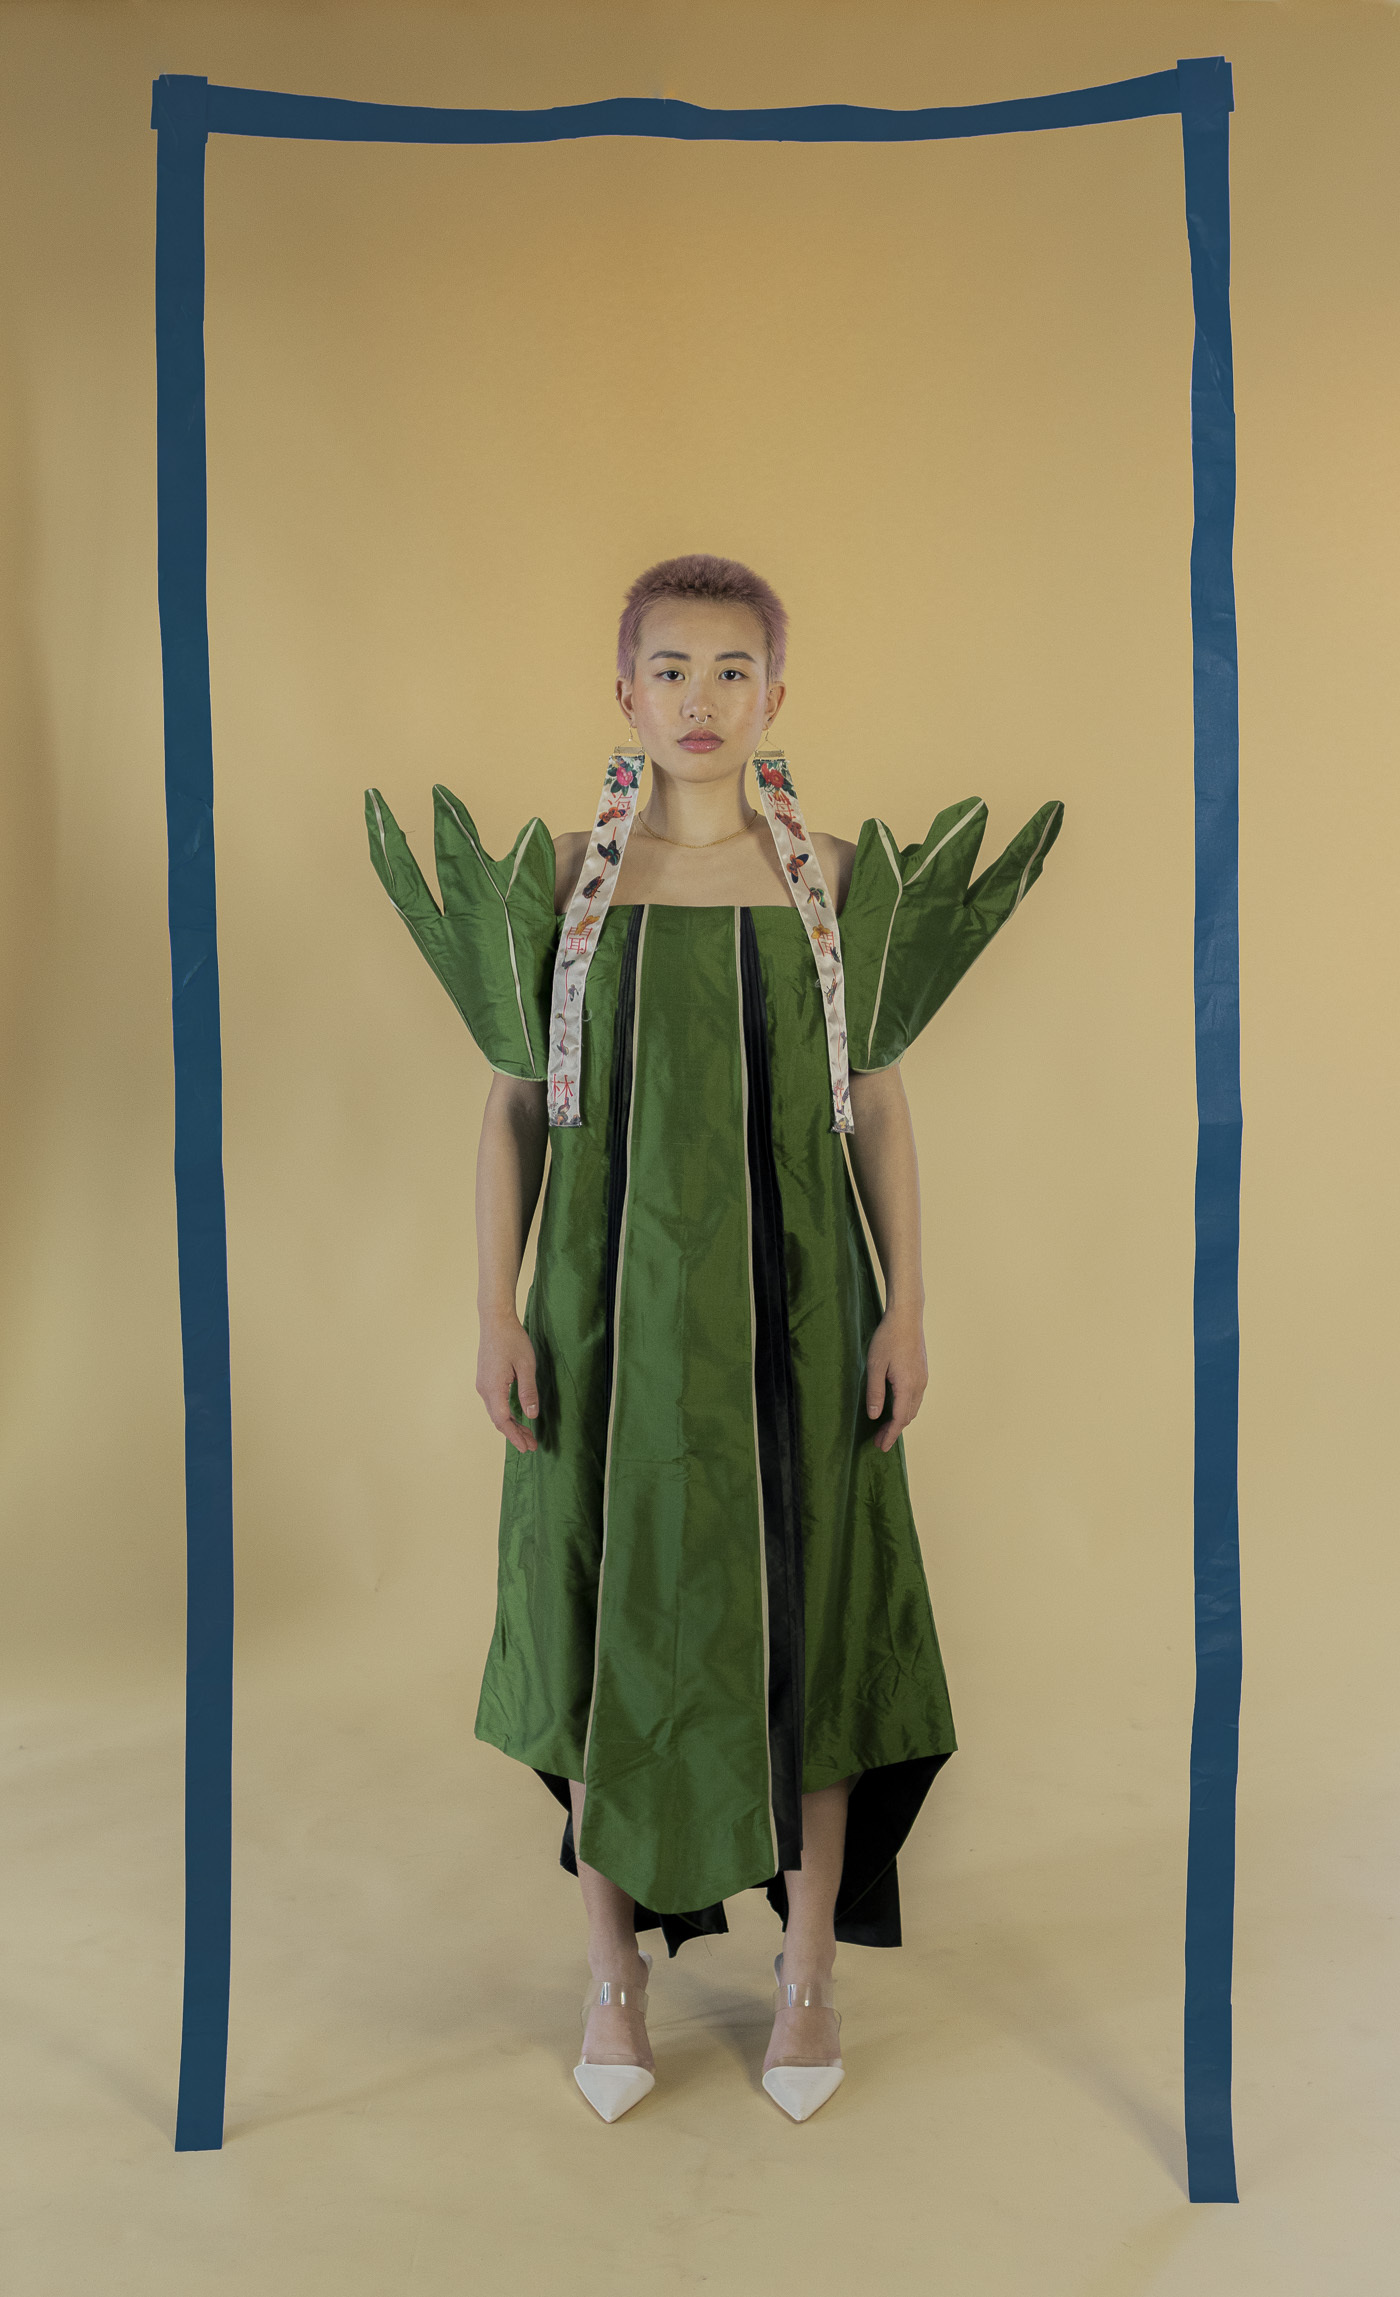 Lucky stands wearing a leaf inspired green and white dress. They are framed with hanging blue tape